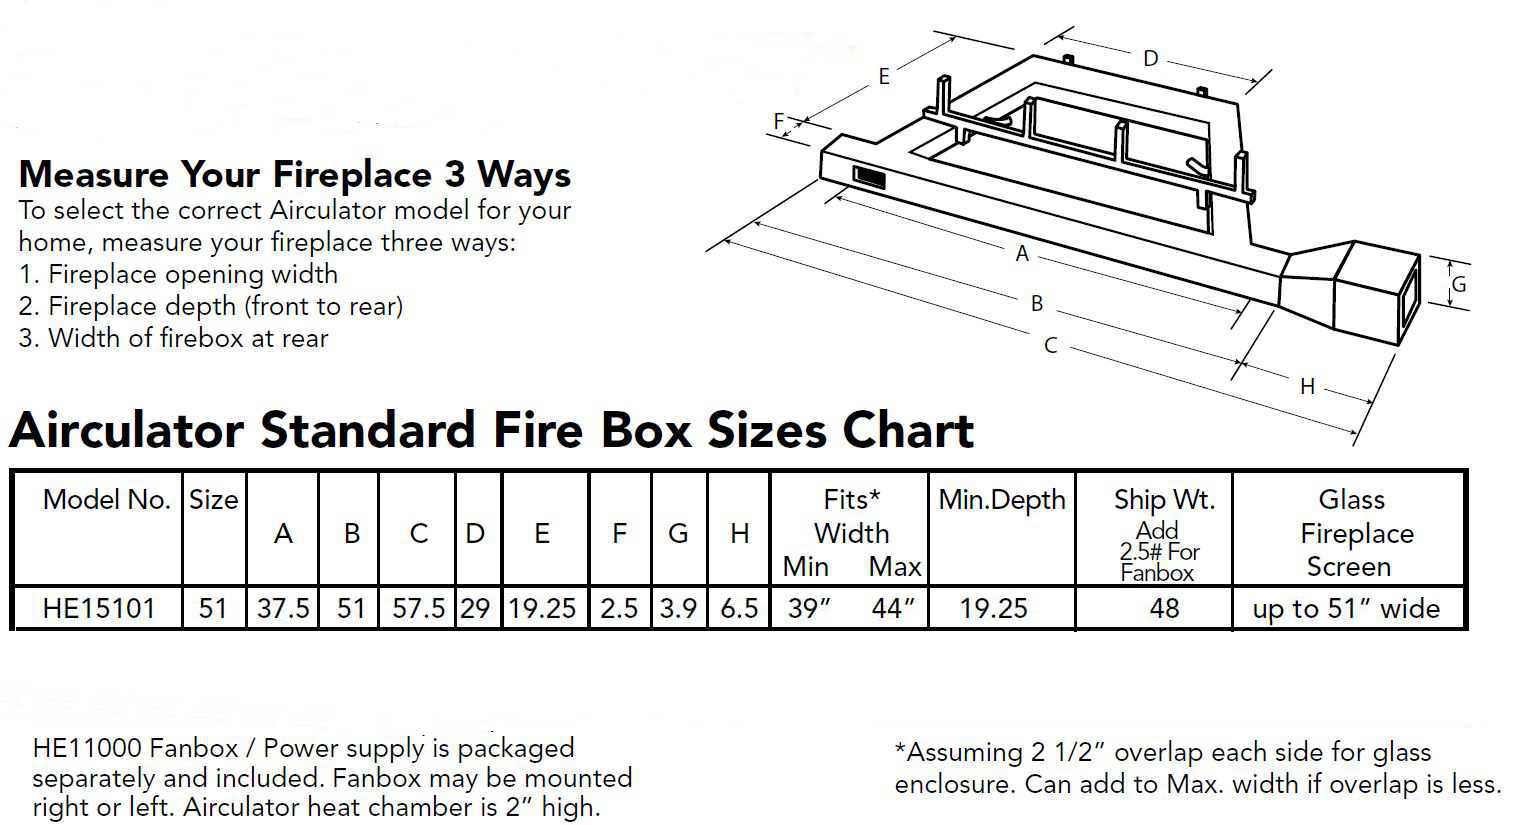 51" Aircualtor Fireplace Heat Exchanger Specifications